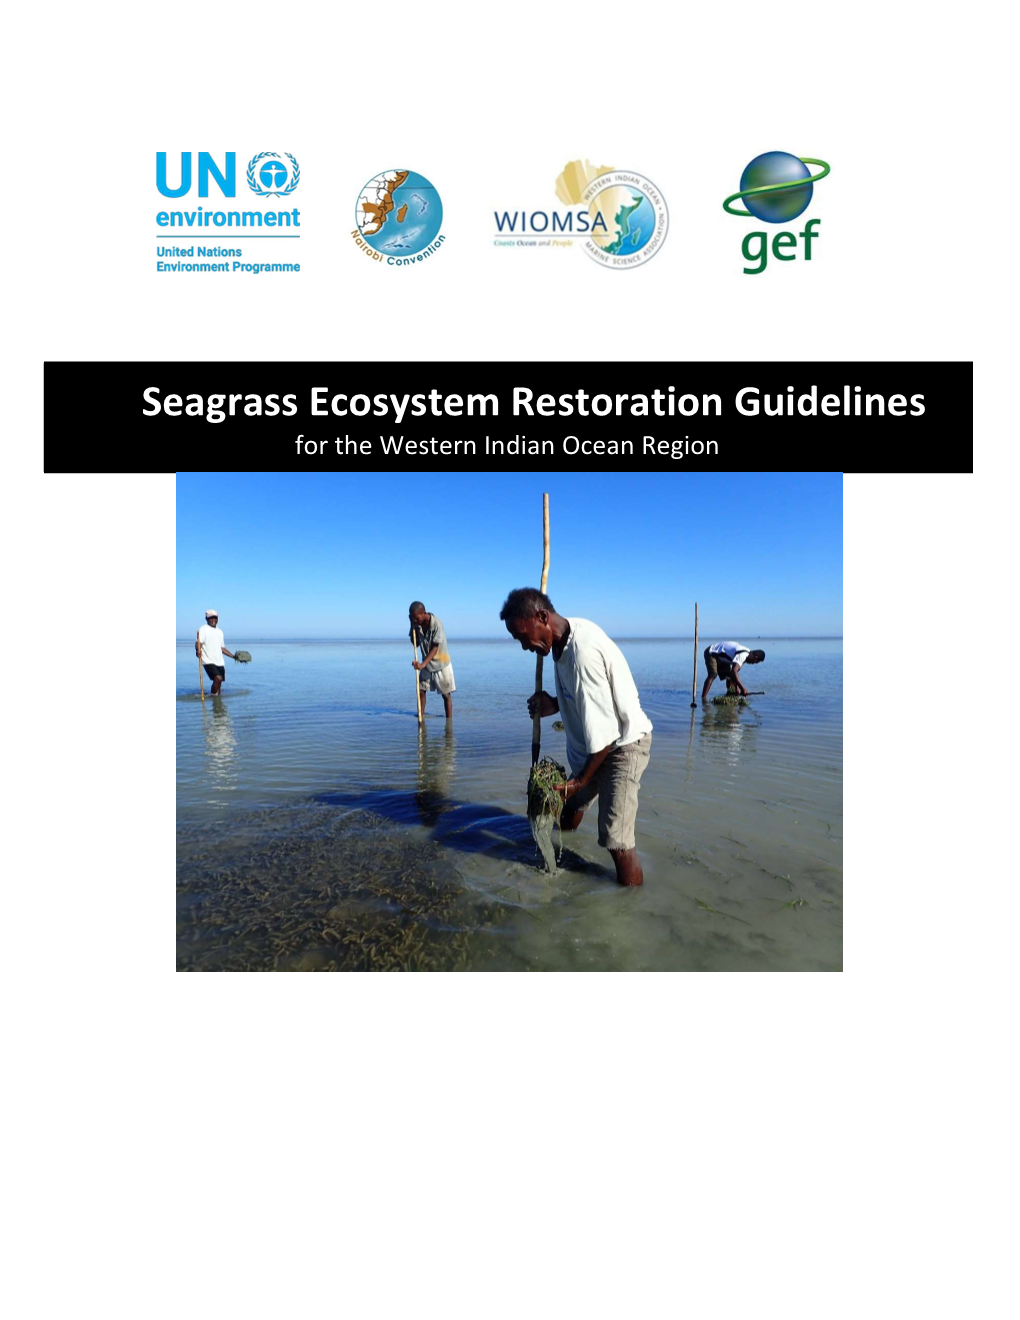 Seagrass Ecosystem Restoration Guidelines for the Western Indian Ocean Region